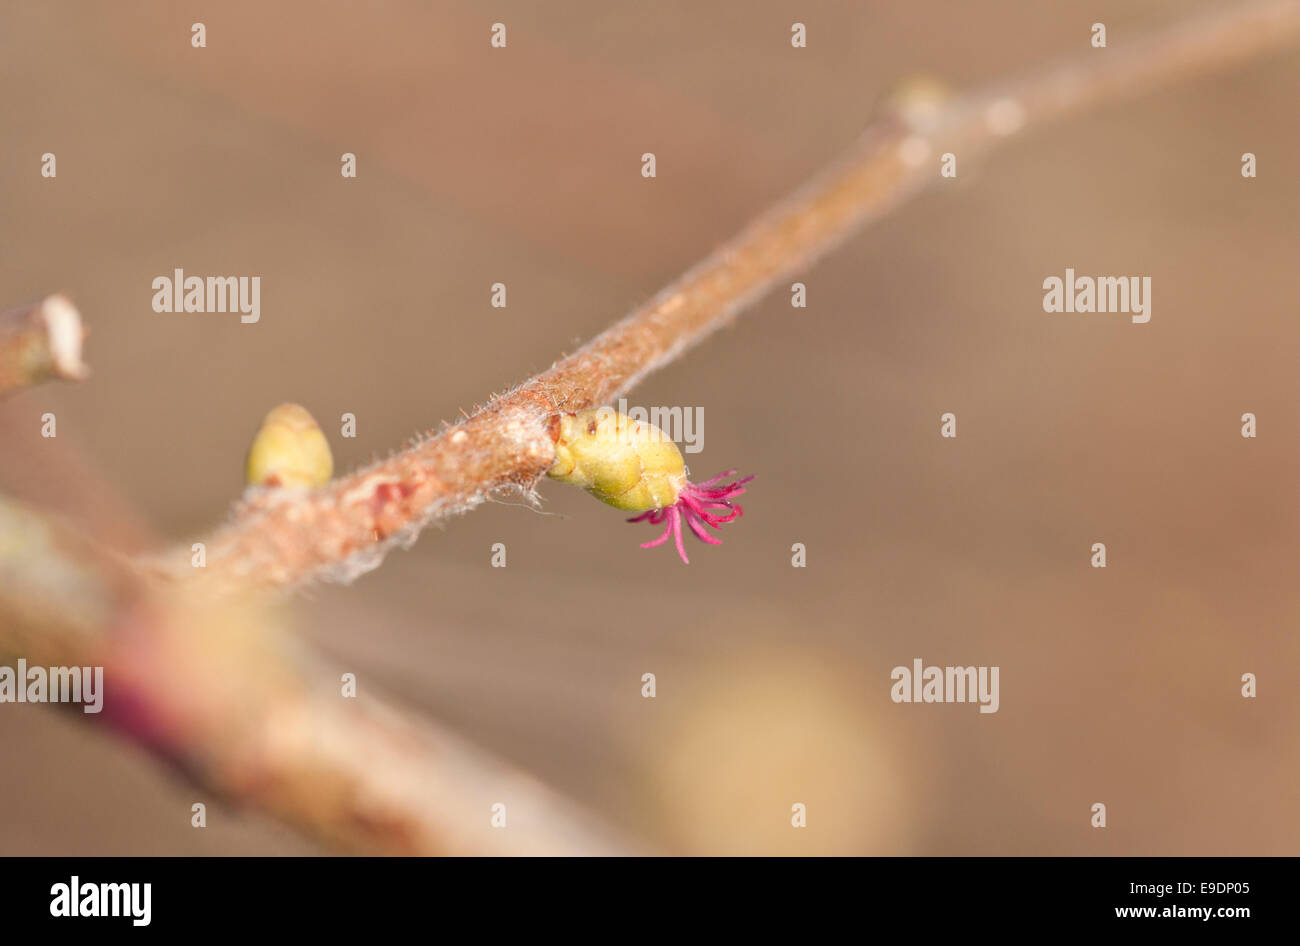 A single small red flower of Hazel, a harbinger of spring against a drab winter brown background Stock Photo